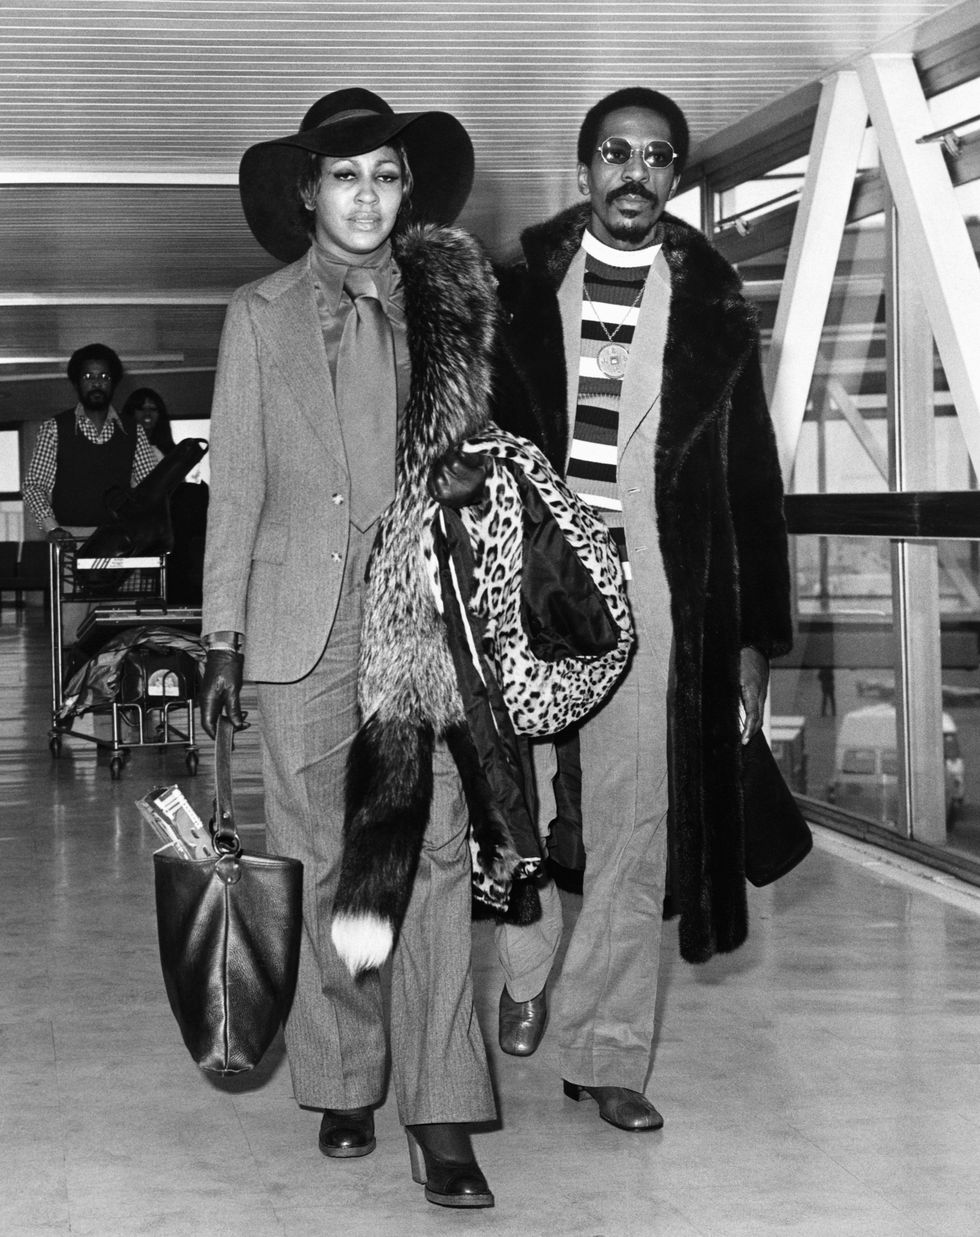 tina and ike turner walk inside a building carrying bags and coats